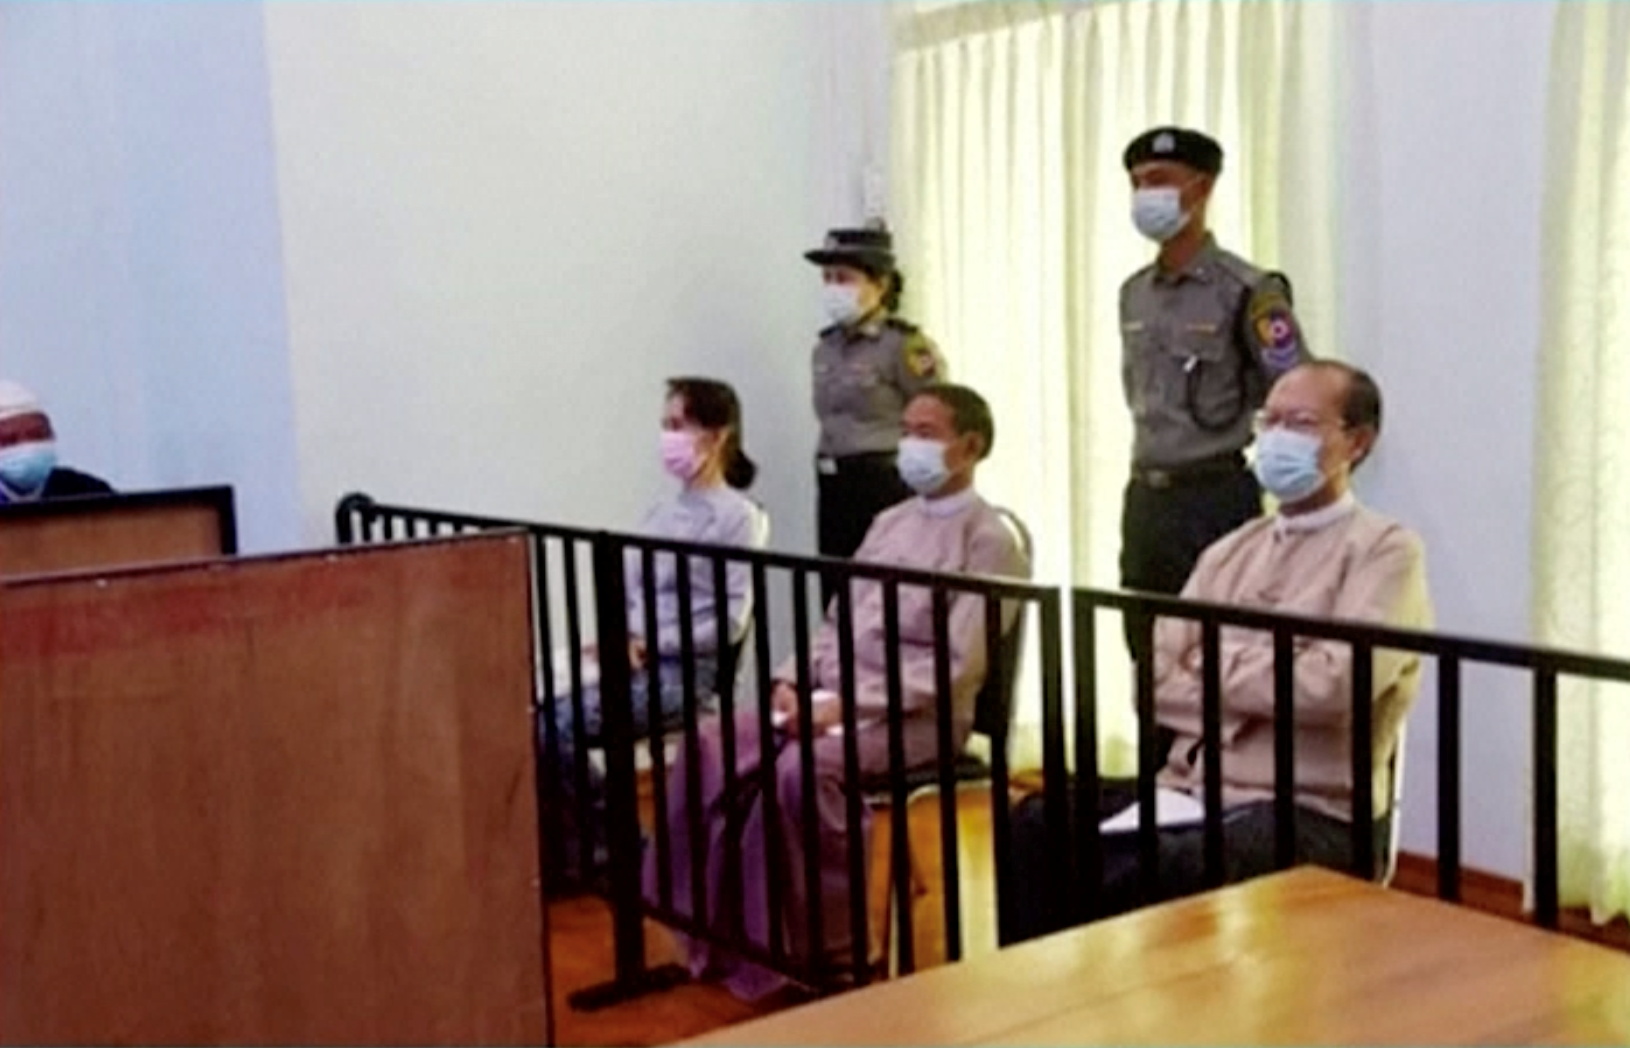 File photo of ousted State Counsellor Aung San Suu Kyi, seated at left, alongside former president Win Myint and doctor Myo Aung appear at a court in Naypyitaw, Myanmar, on May 24, 2021. Image: MRTV